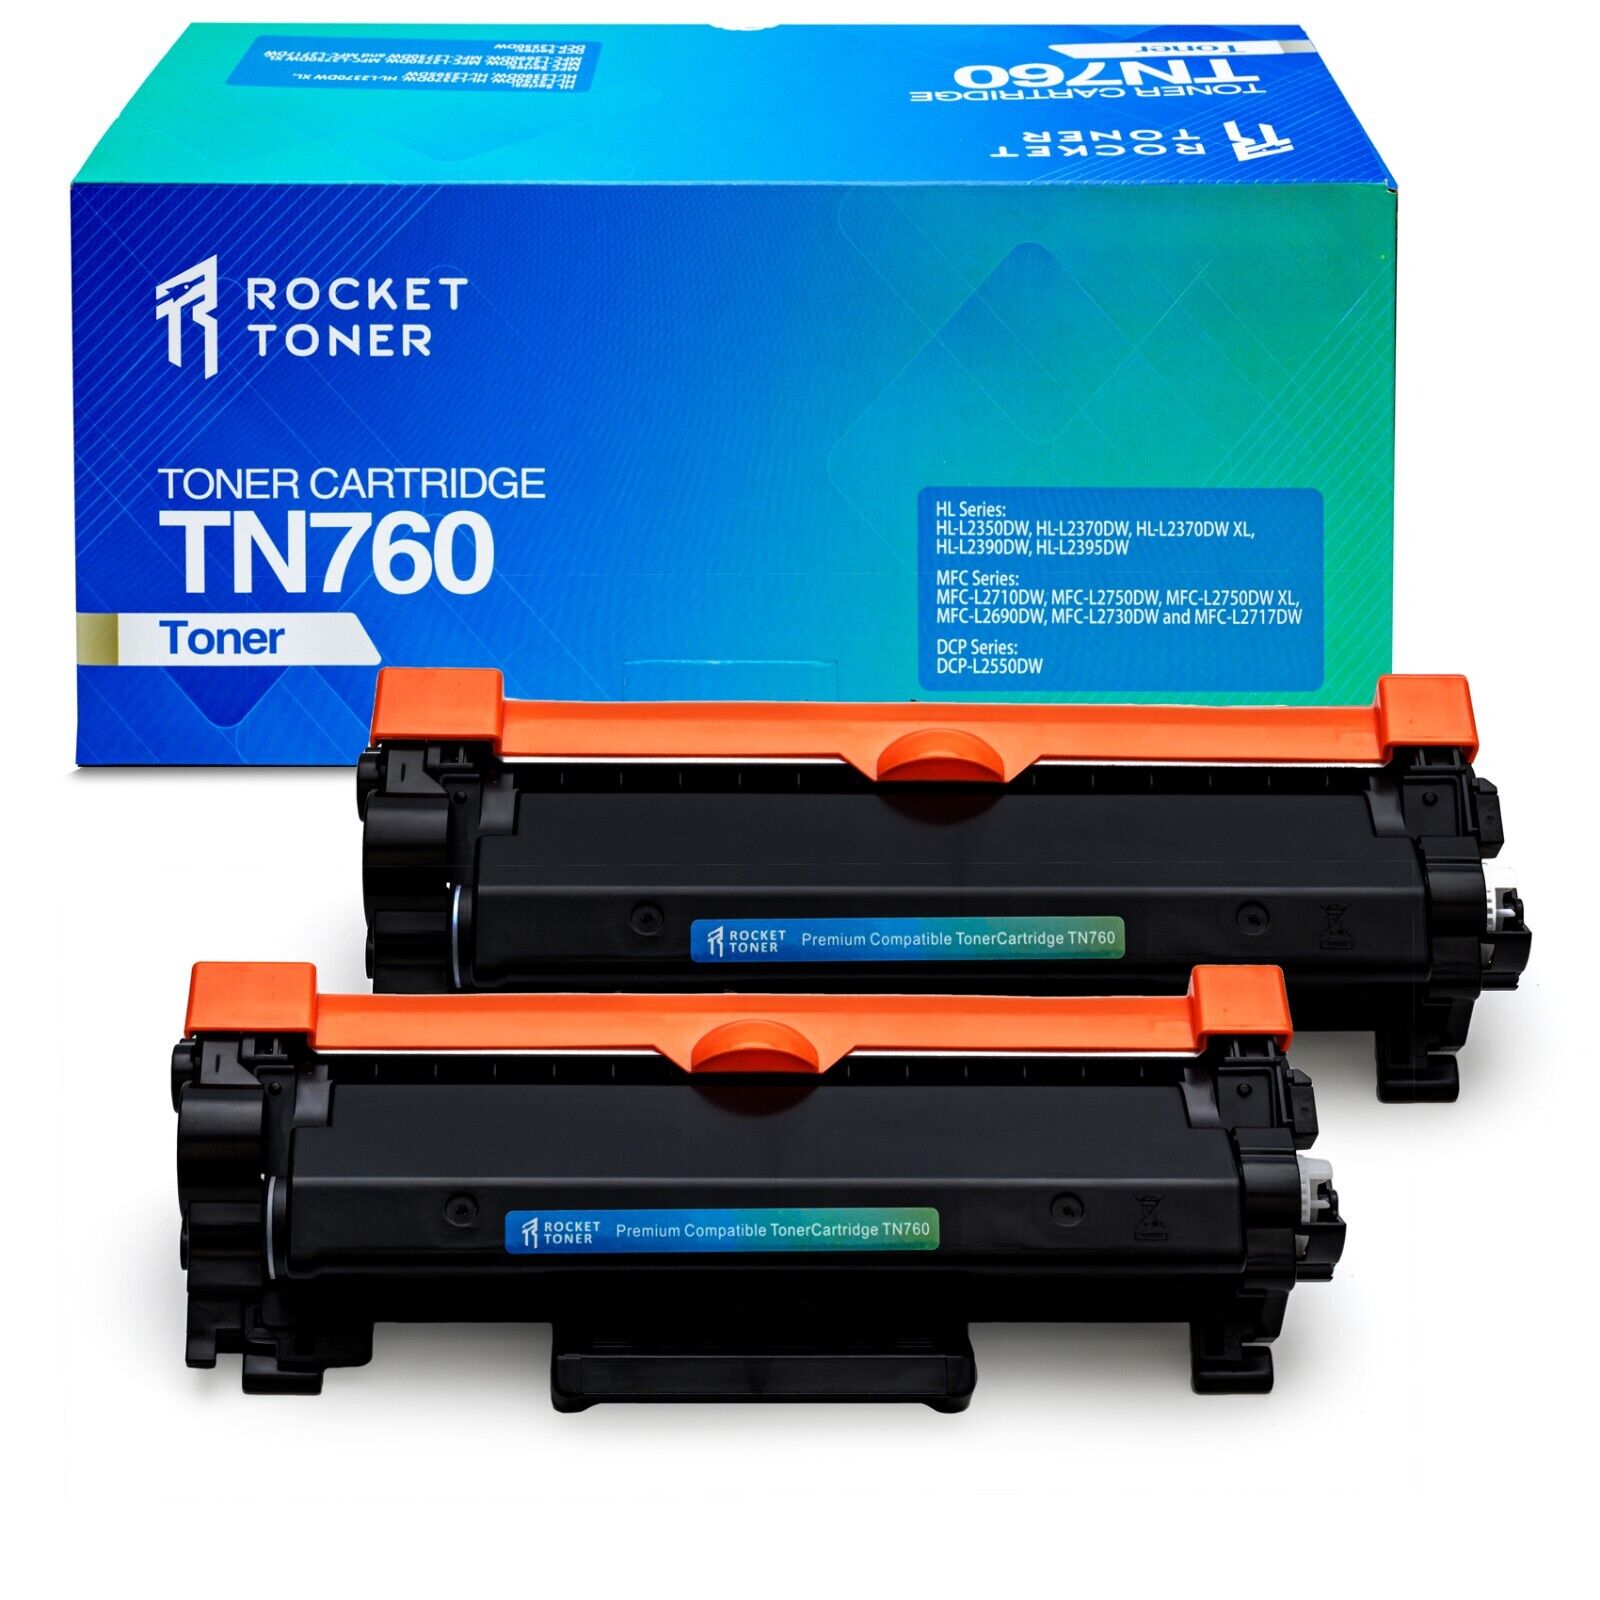 TN760 Toner Cartridge Compatible with Brother Printers – 2-Pack Replacement Tone